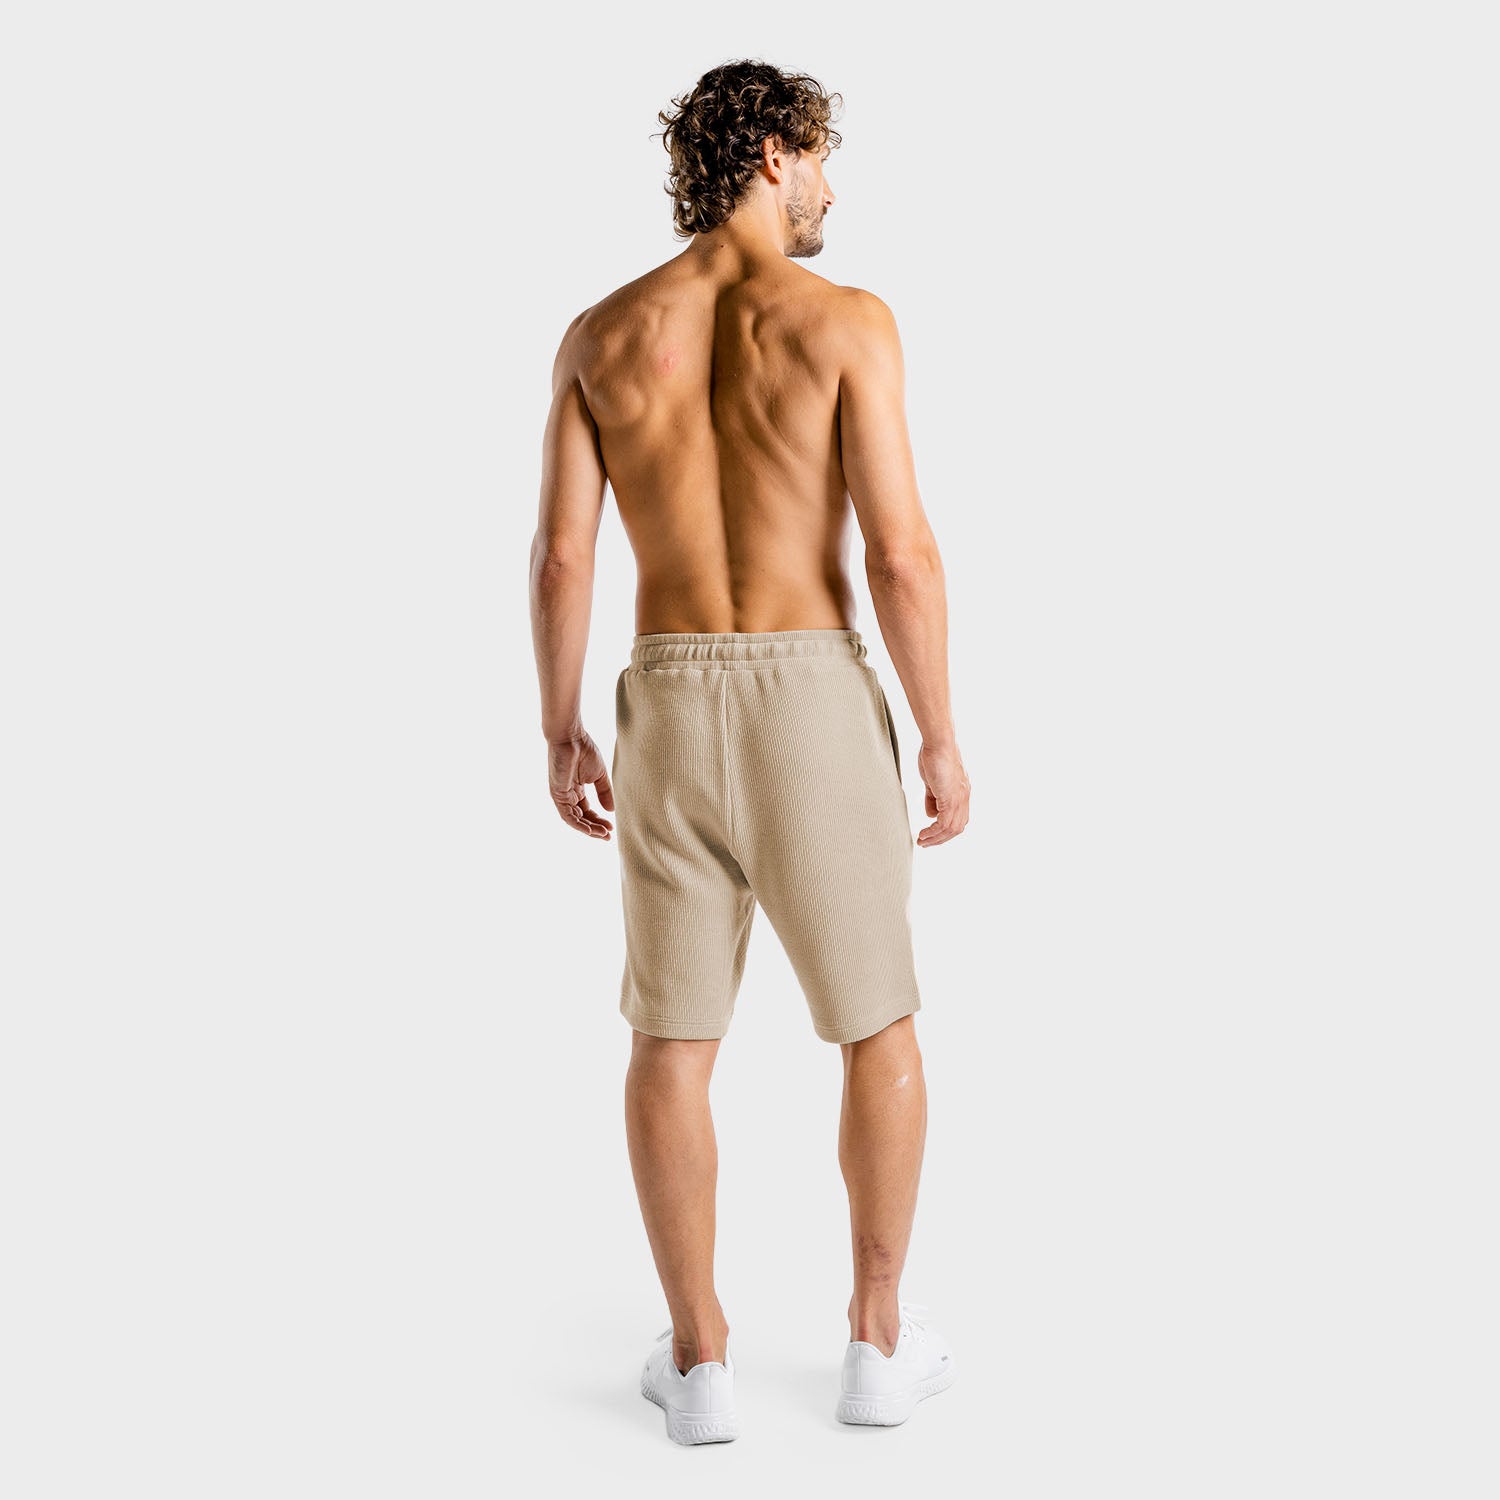 squatwolf-workout-short-for-men-luxe-shorts-stone-gym-wear